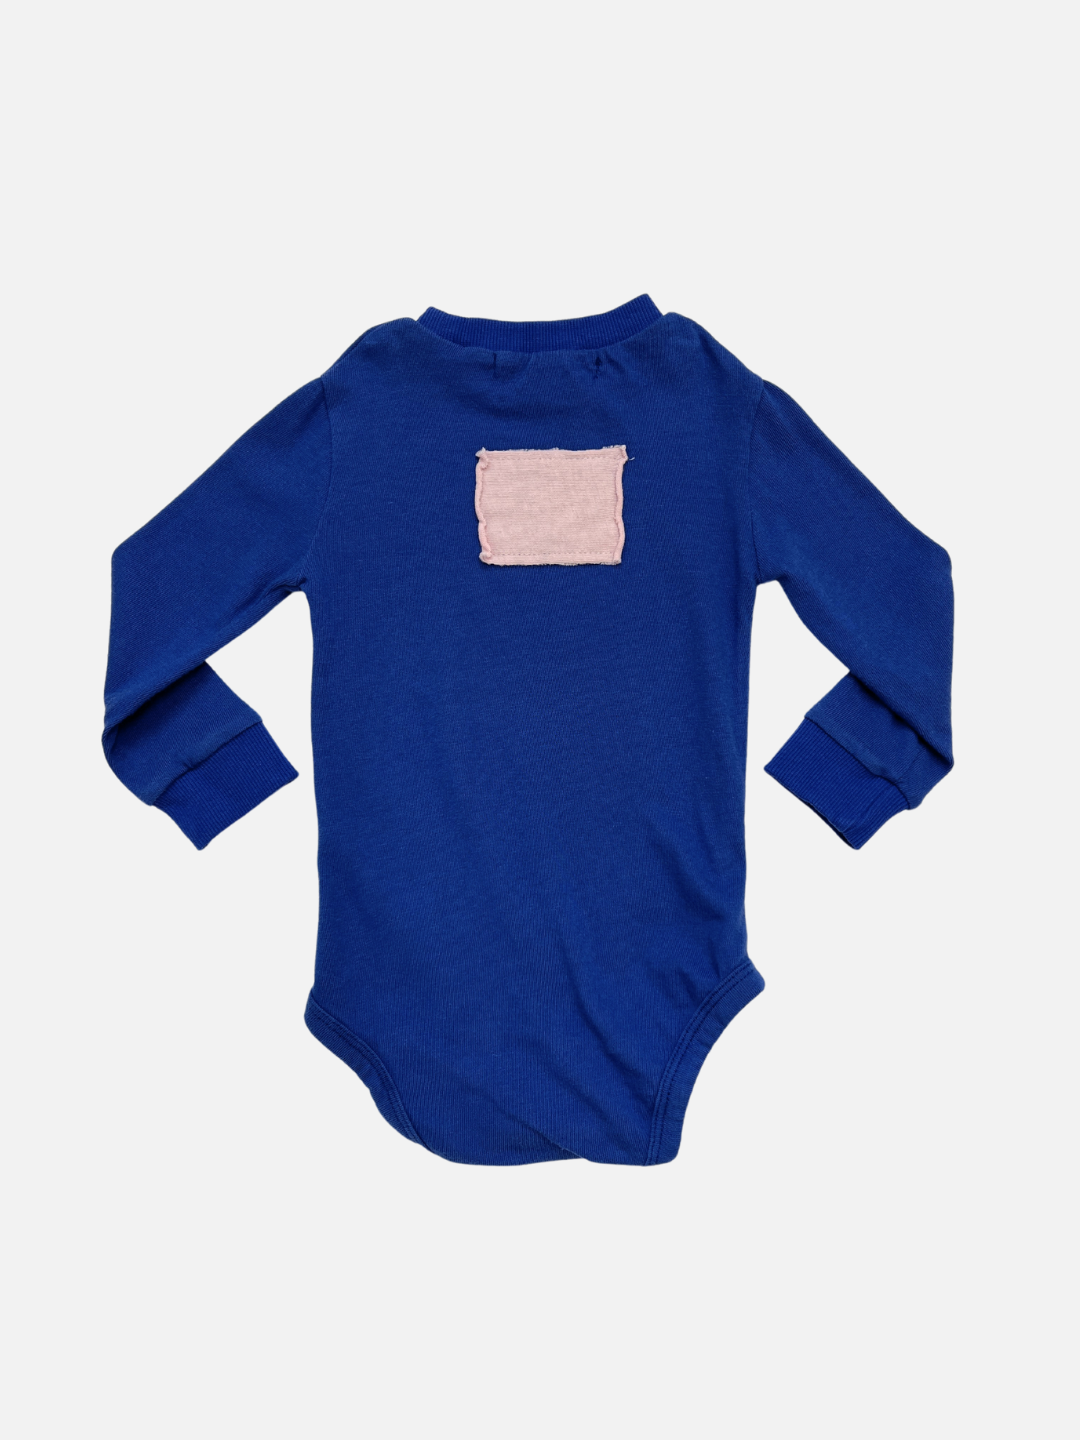 Back view of the patch onesie in Blue with pink rectangular patch on the back